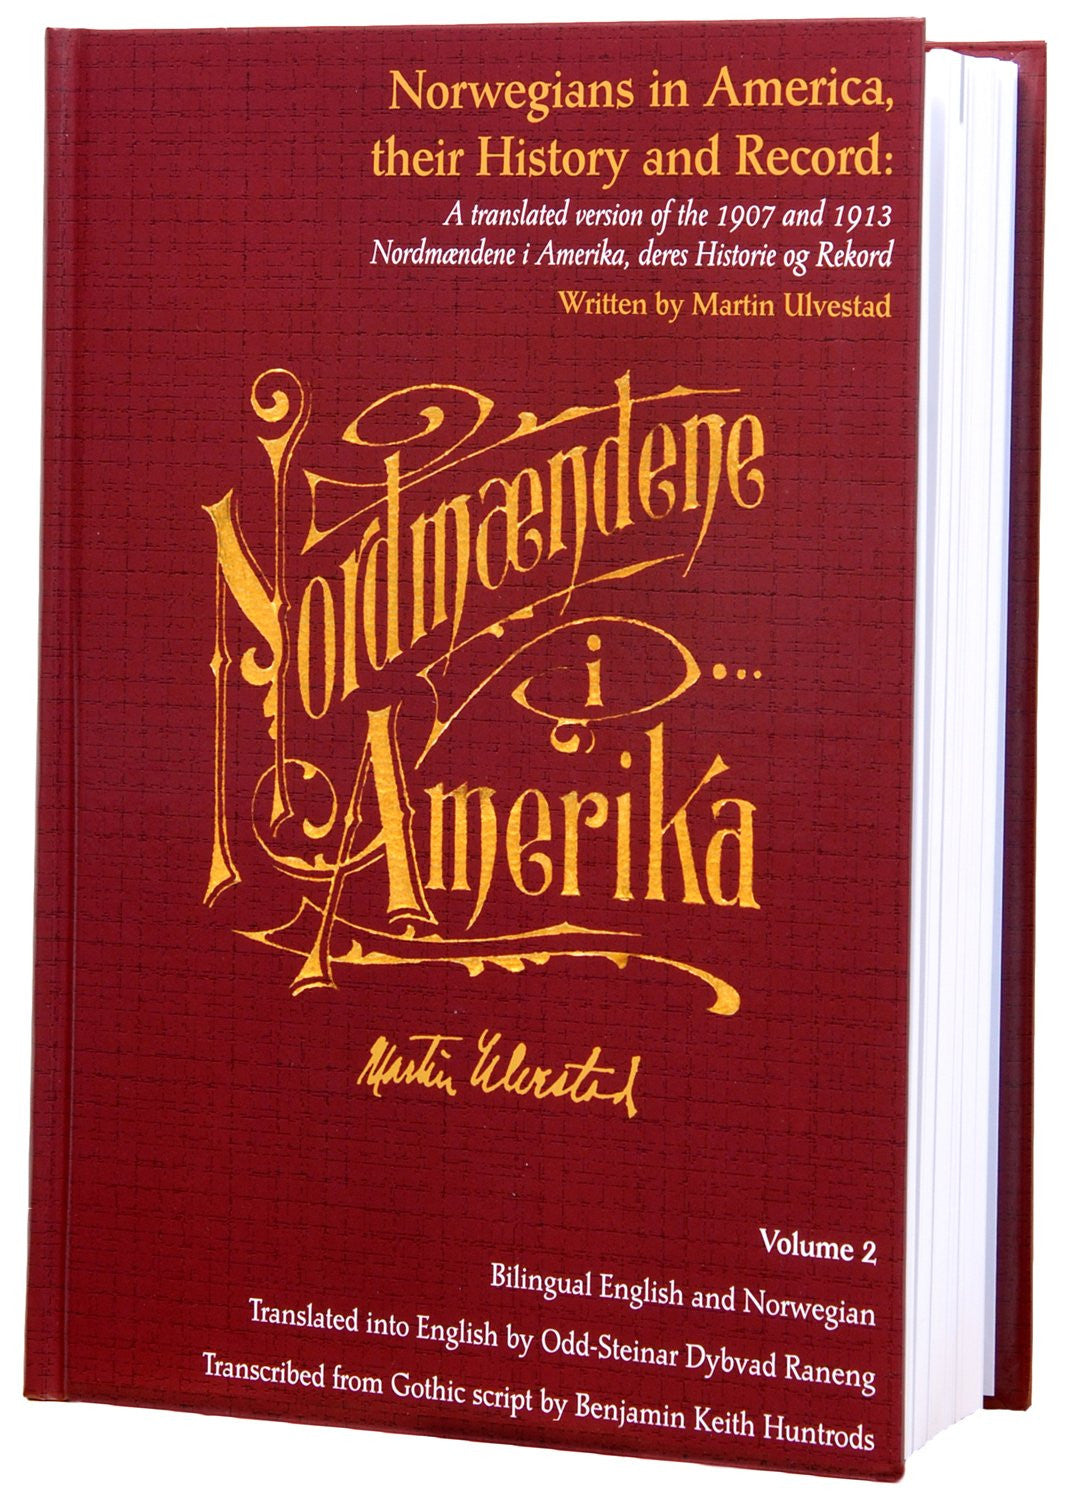 Norwegians in America, their History and Record (years 1825-1907), Volume 2 by Martin Ulvestad